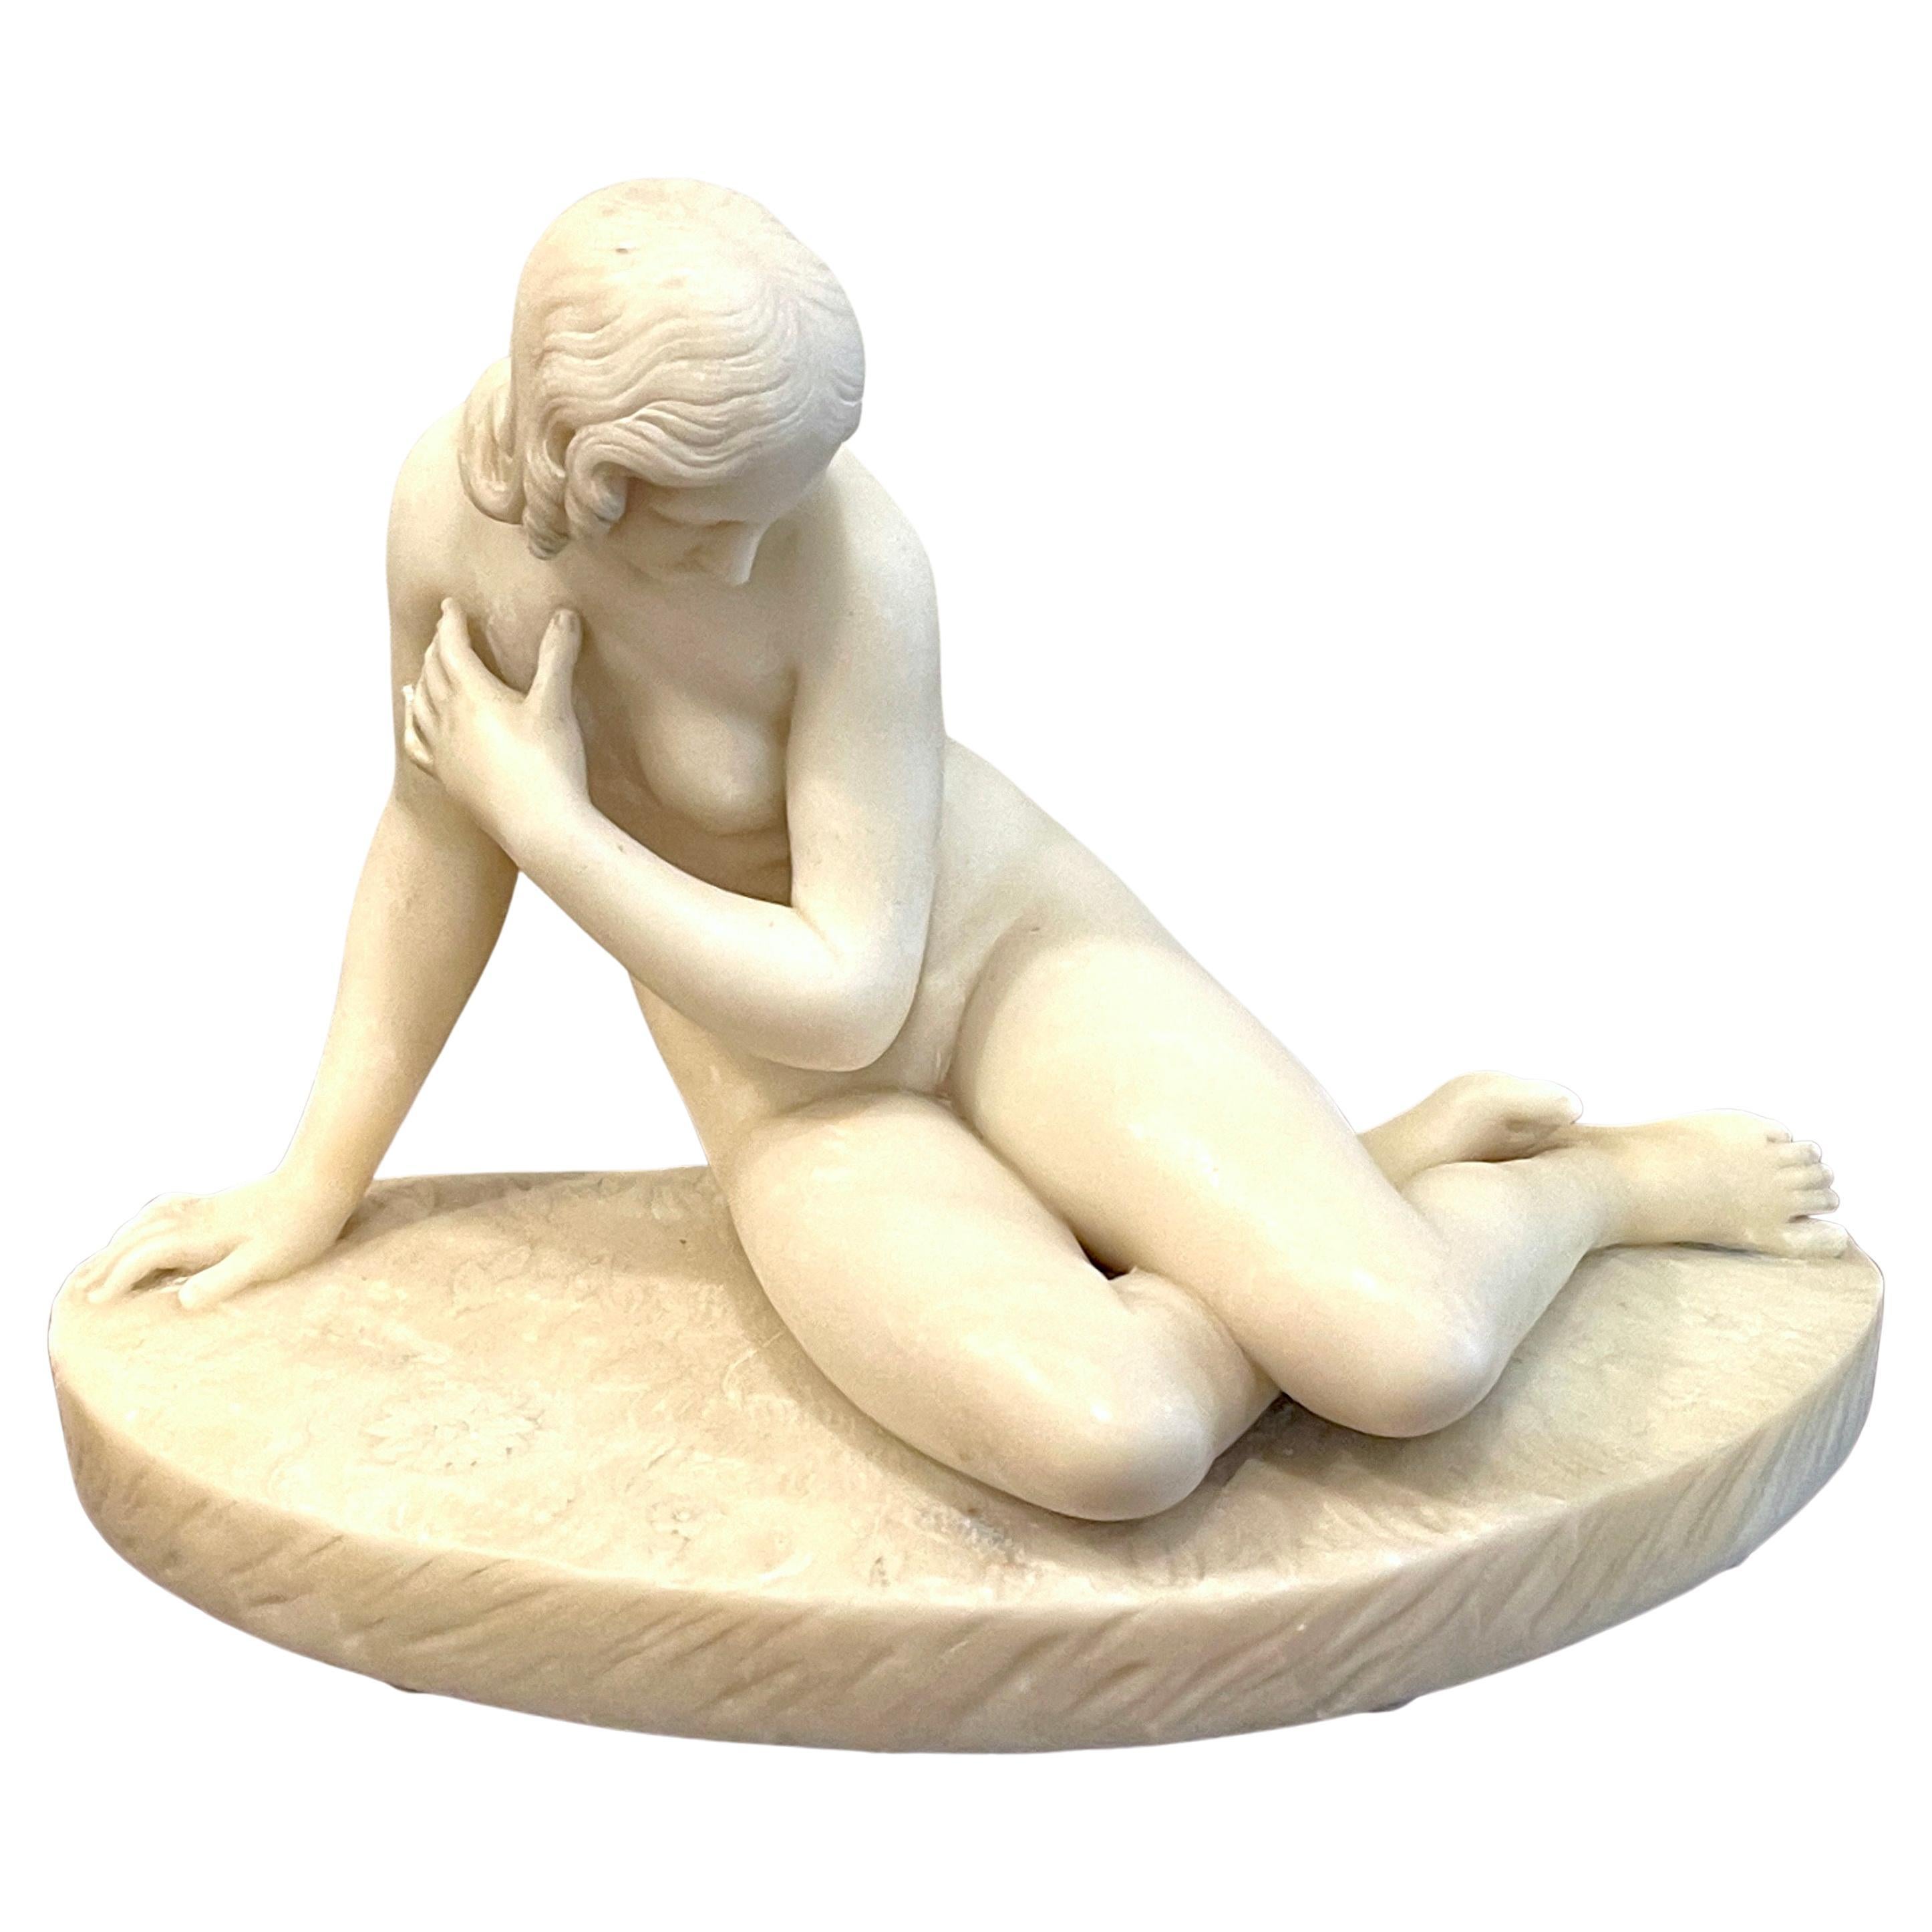 19th Century Marble Sculpture “Eve at the Fountain” After Edward Hodges Baily